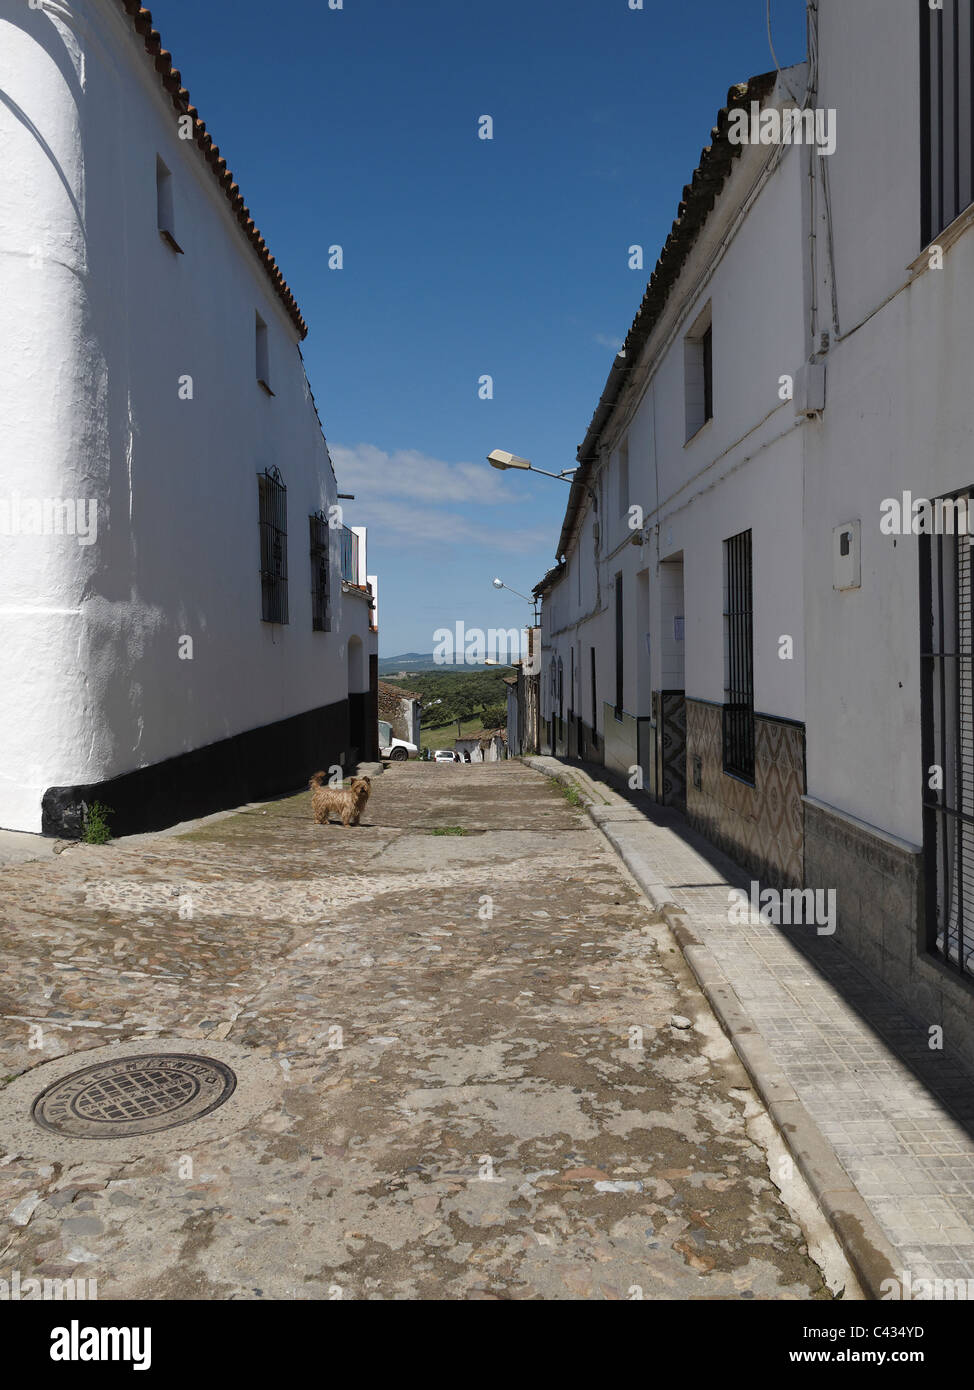 A residential street in Fuentes de León, in the province of Badajoz, Extremadura, Spain. Stock Photo